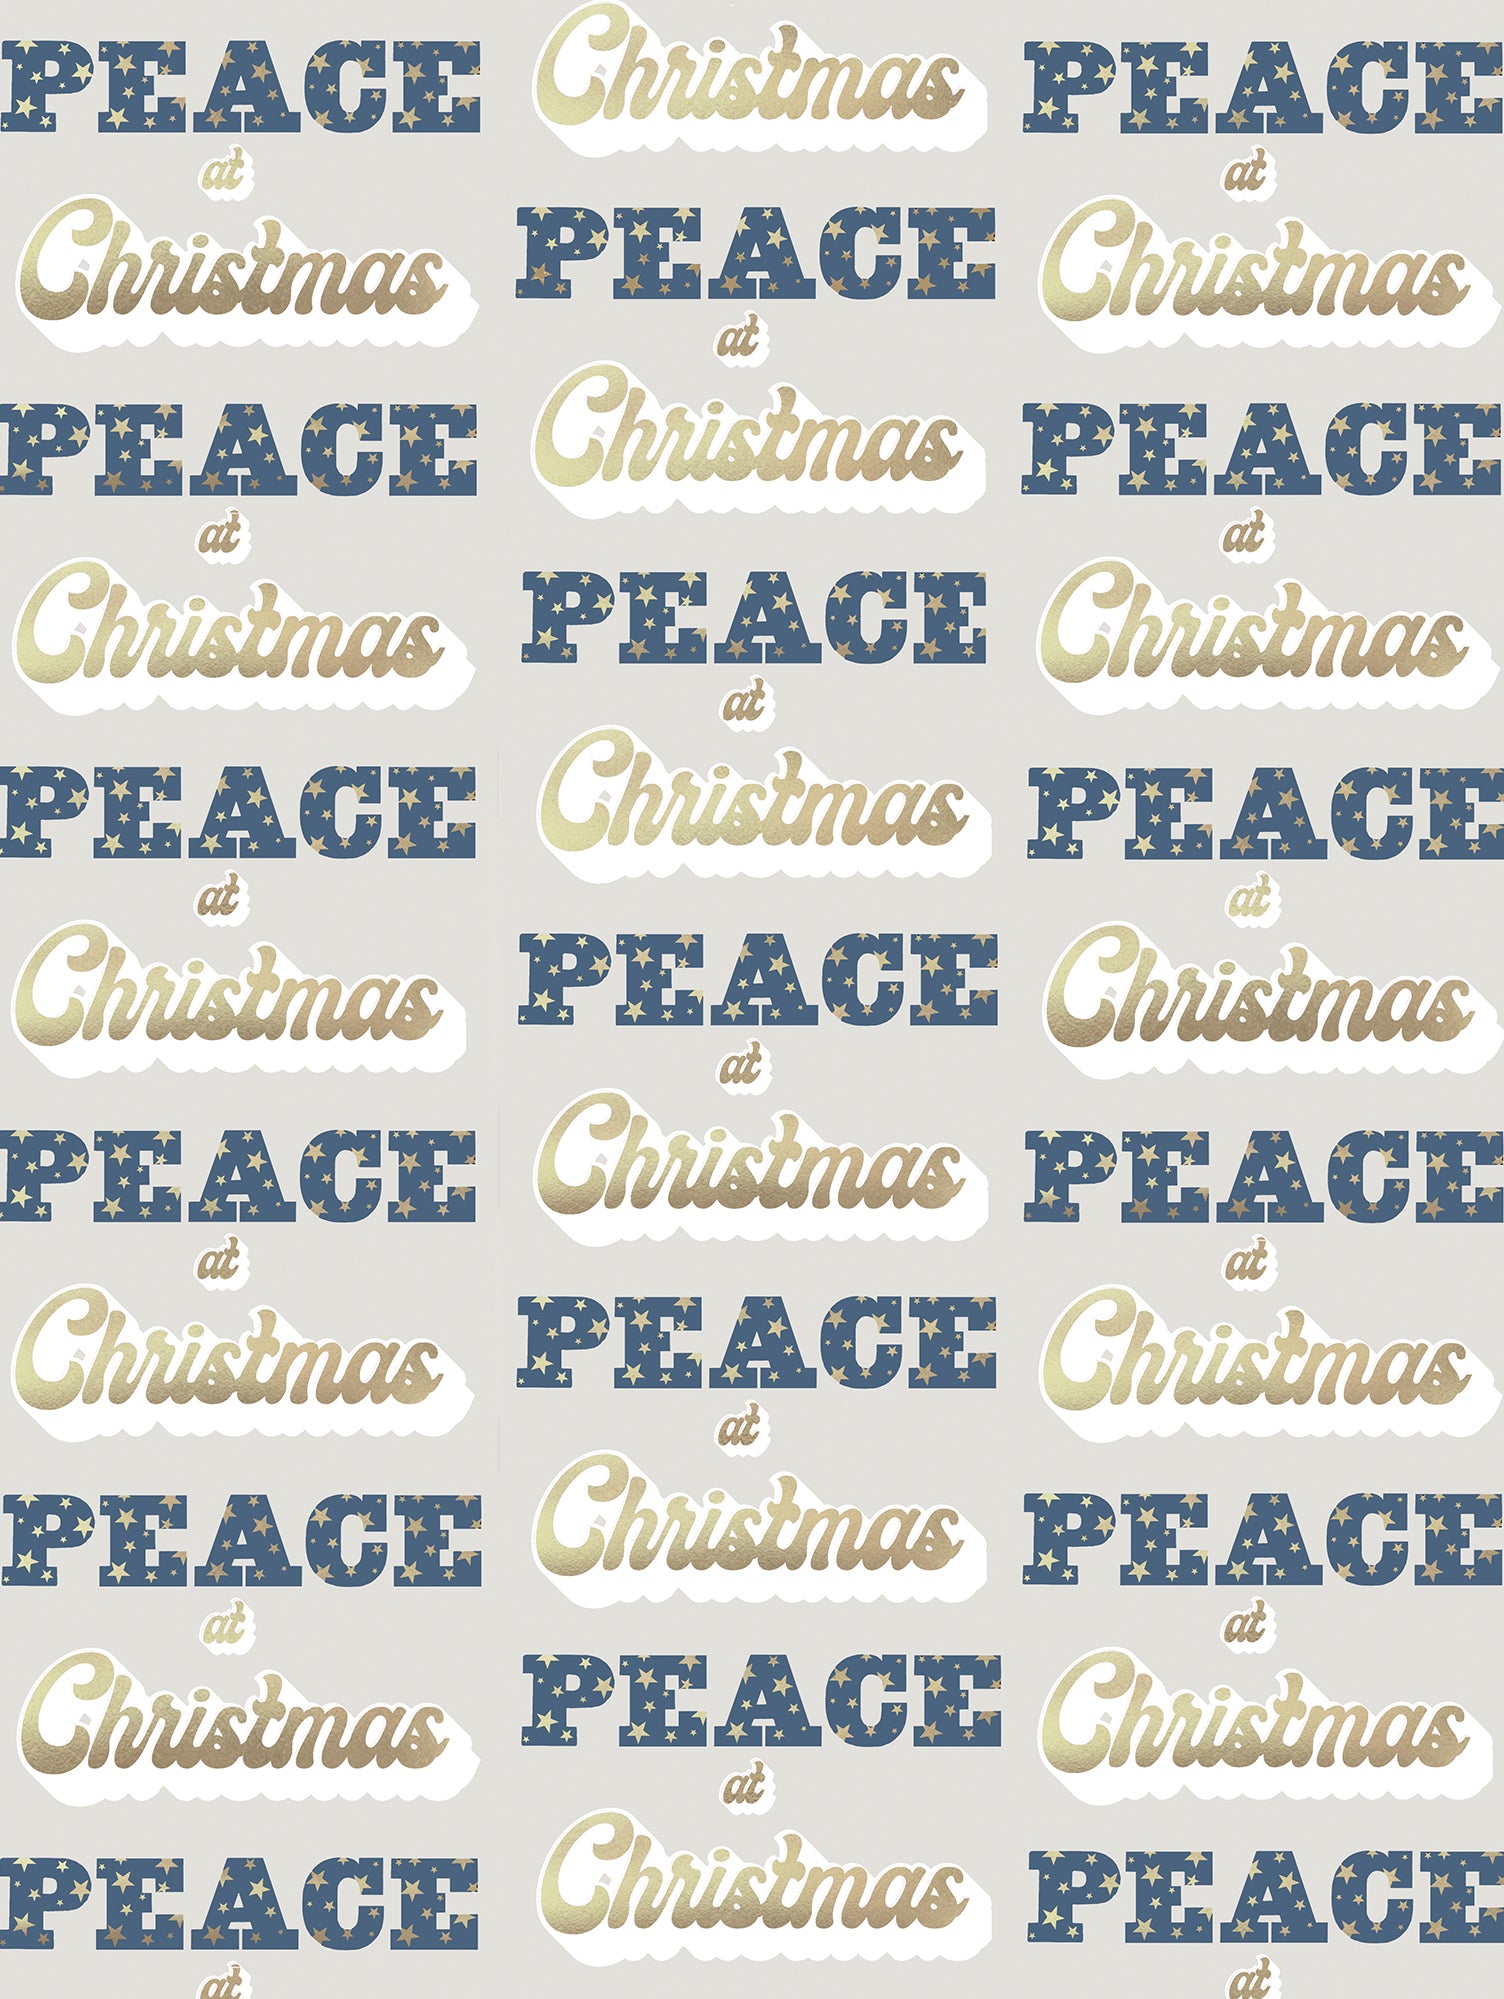 PEACE at Christmas wrapping paper